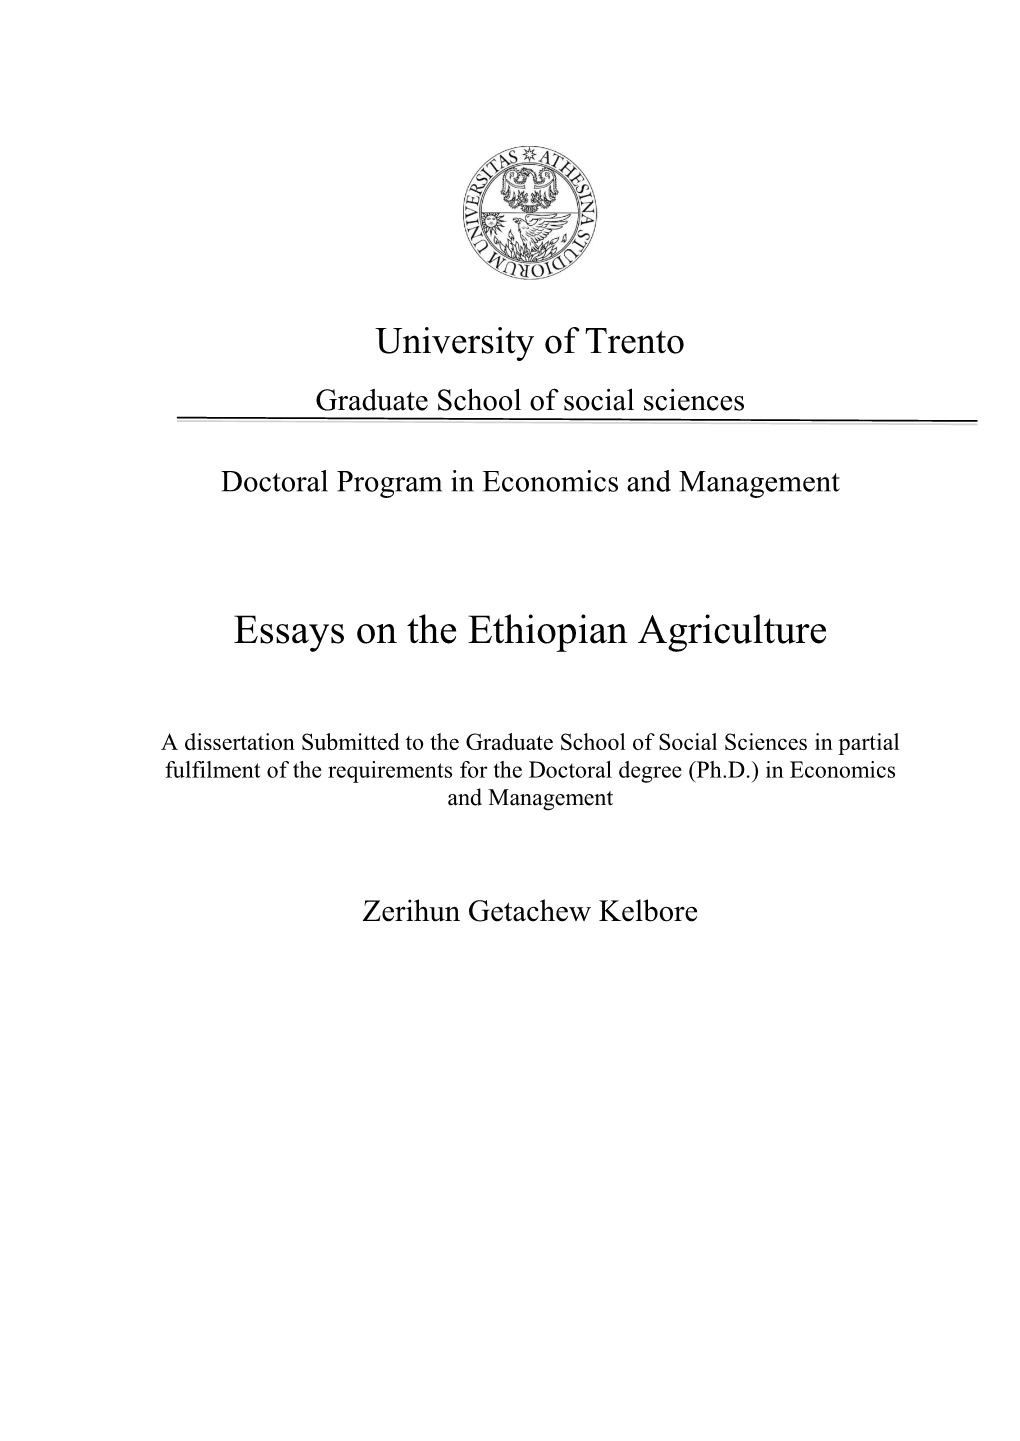 Essays on the Ethiopian Agriculture